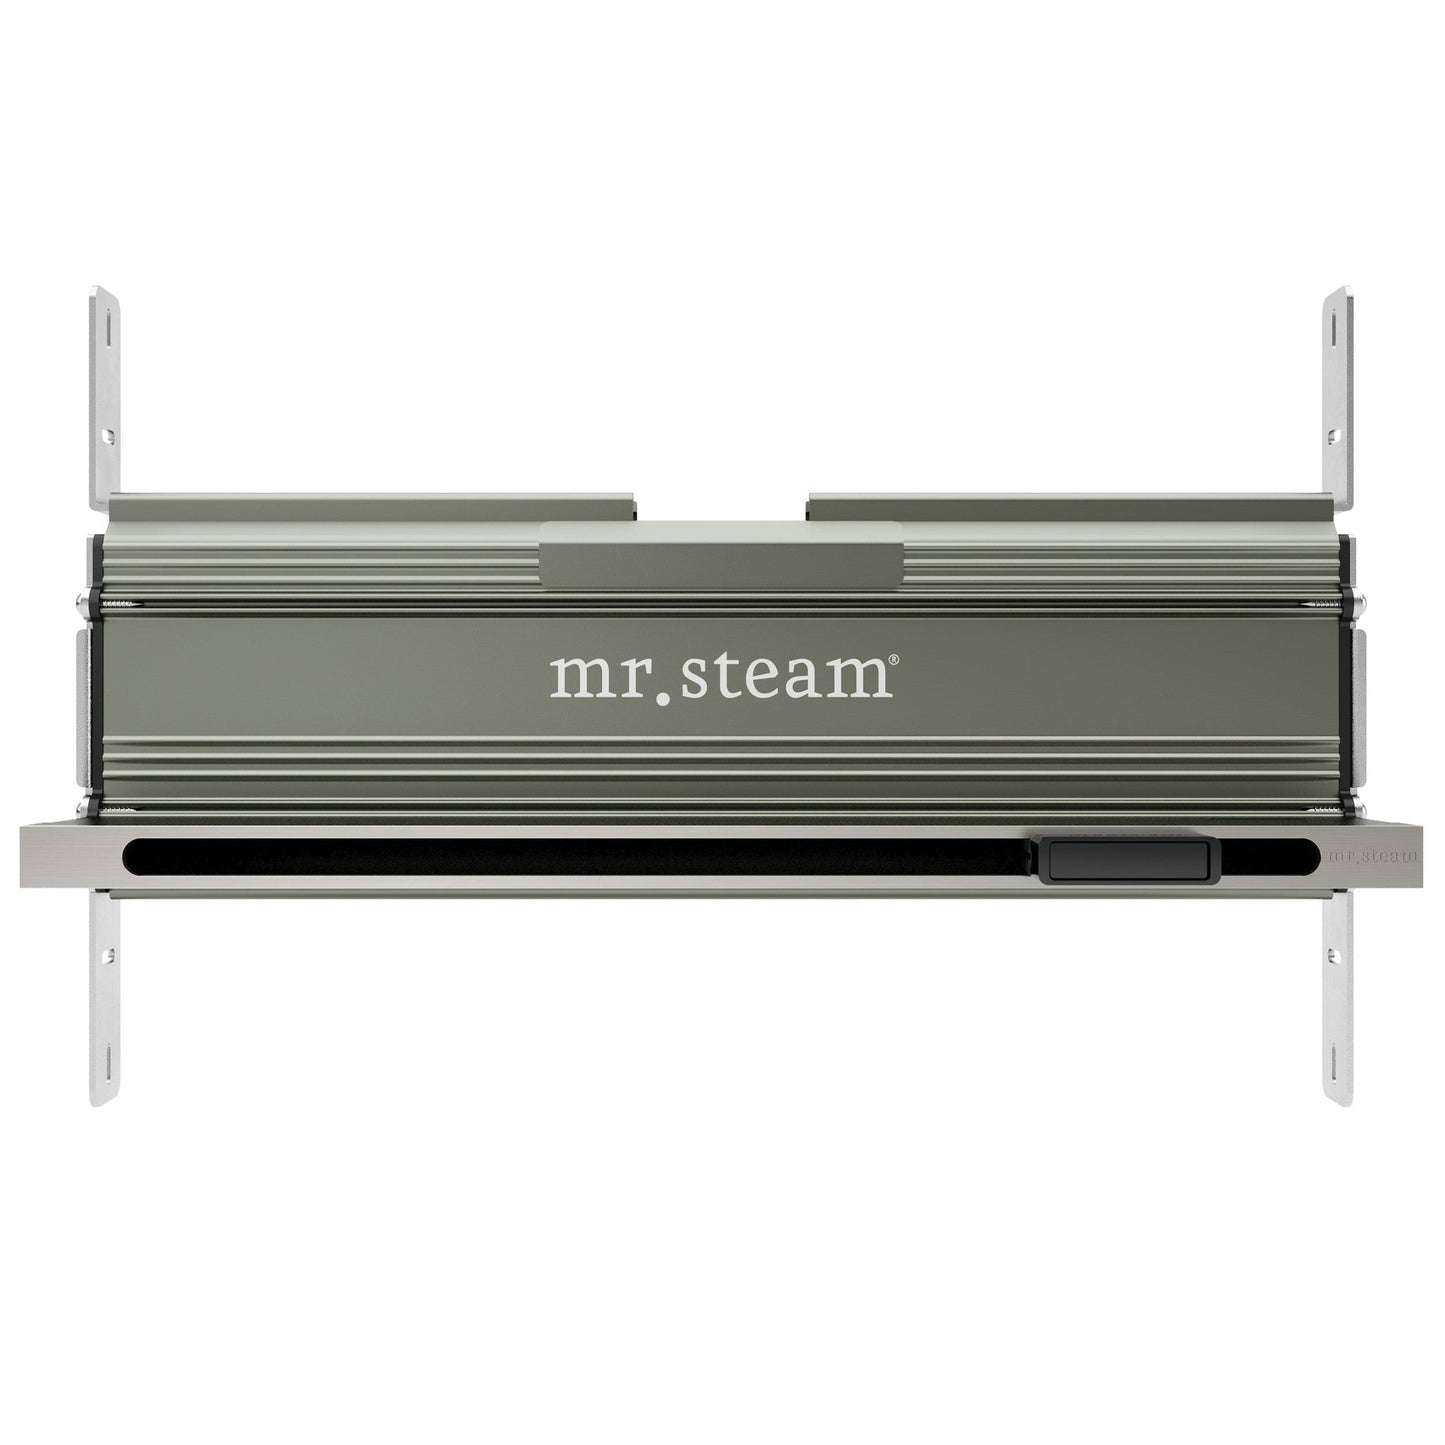 MrSteam AirButler Linear 28" × 13" × 11" Steam Generator Control Kit Package in White Brushed Nickel